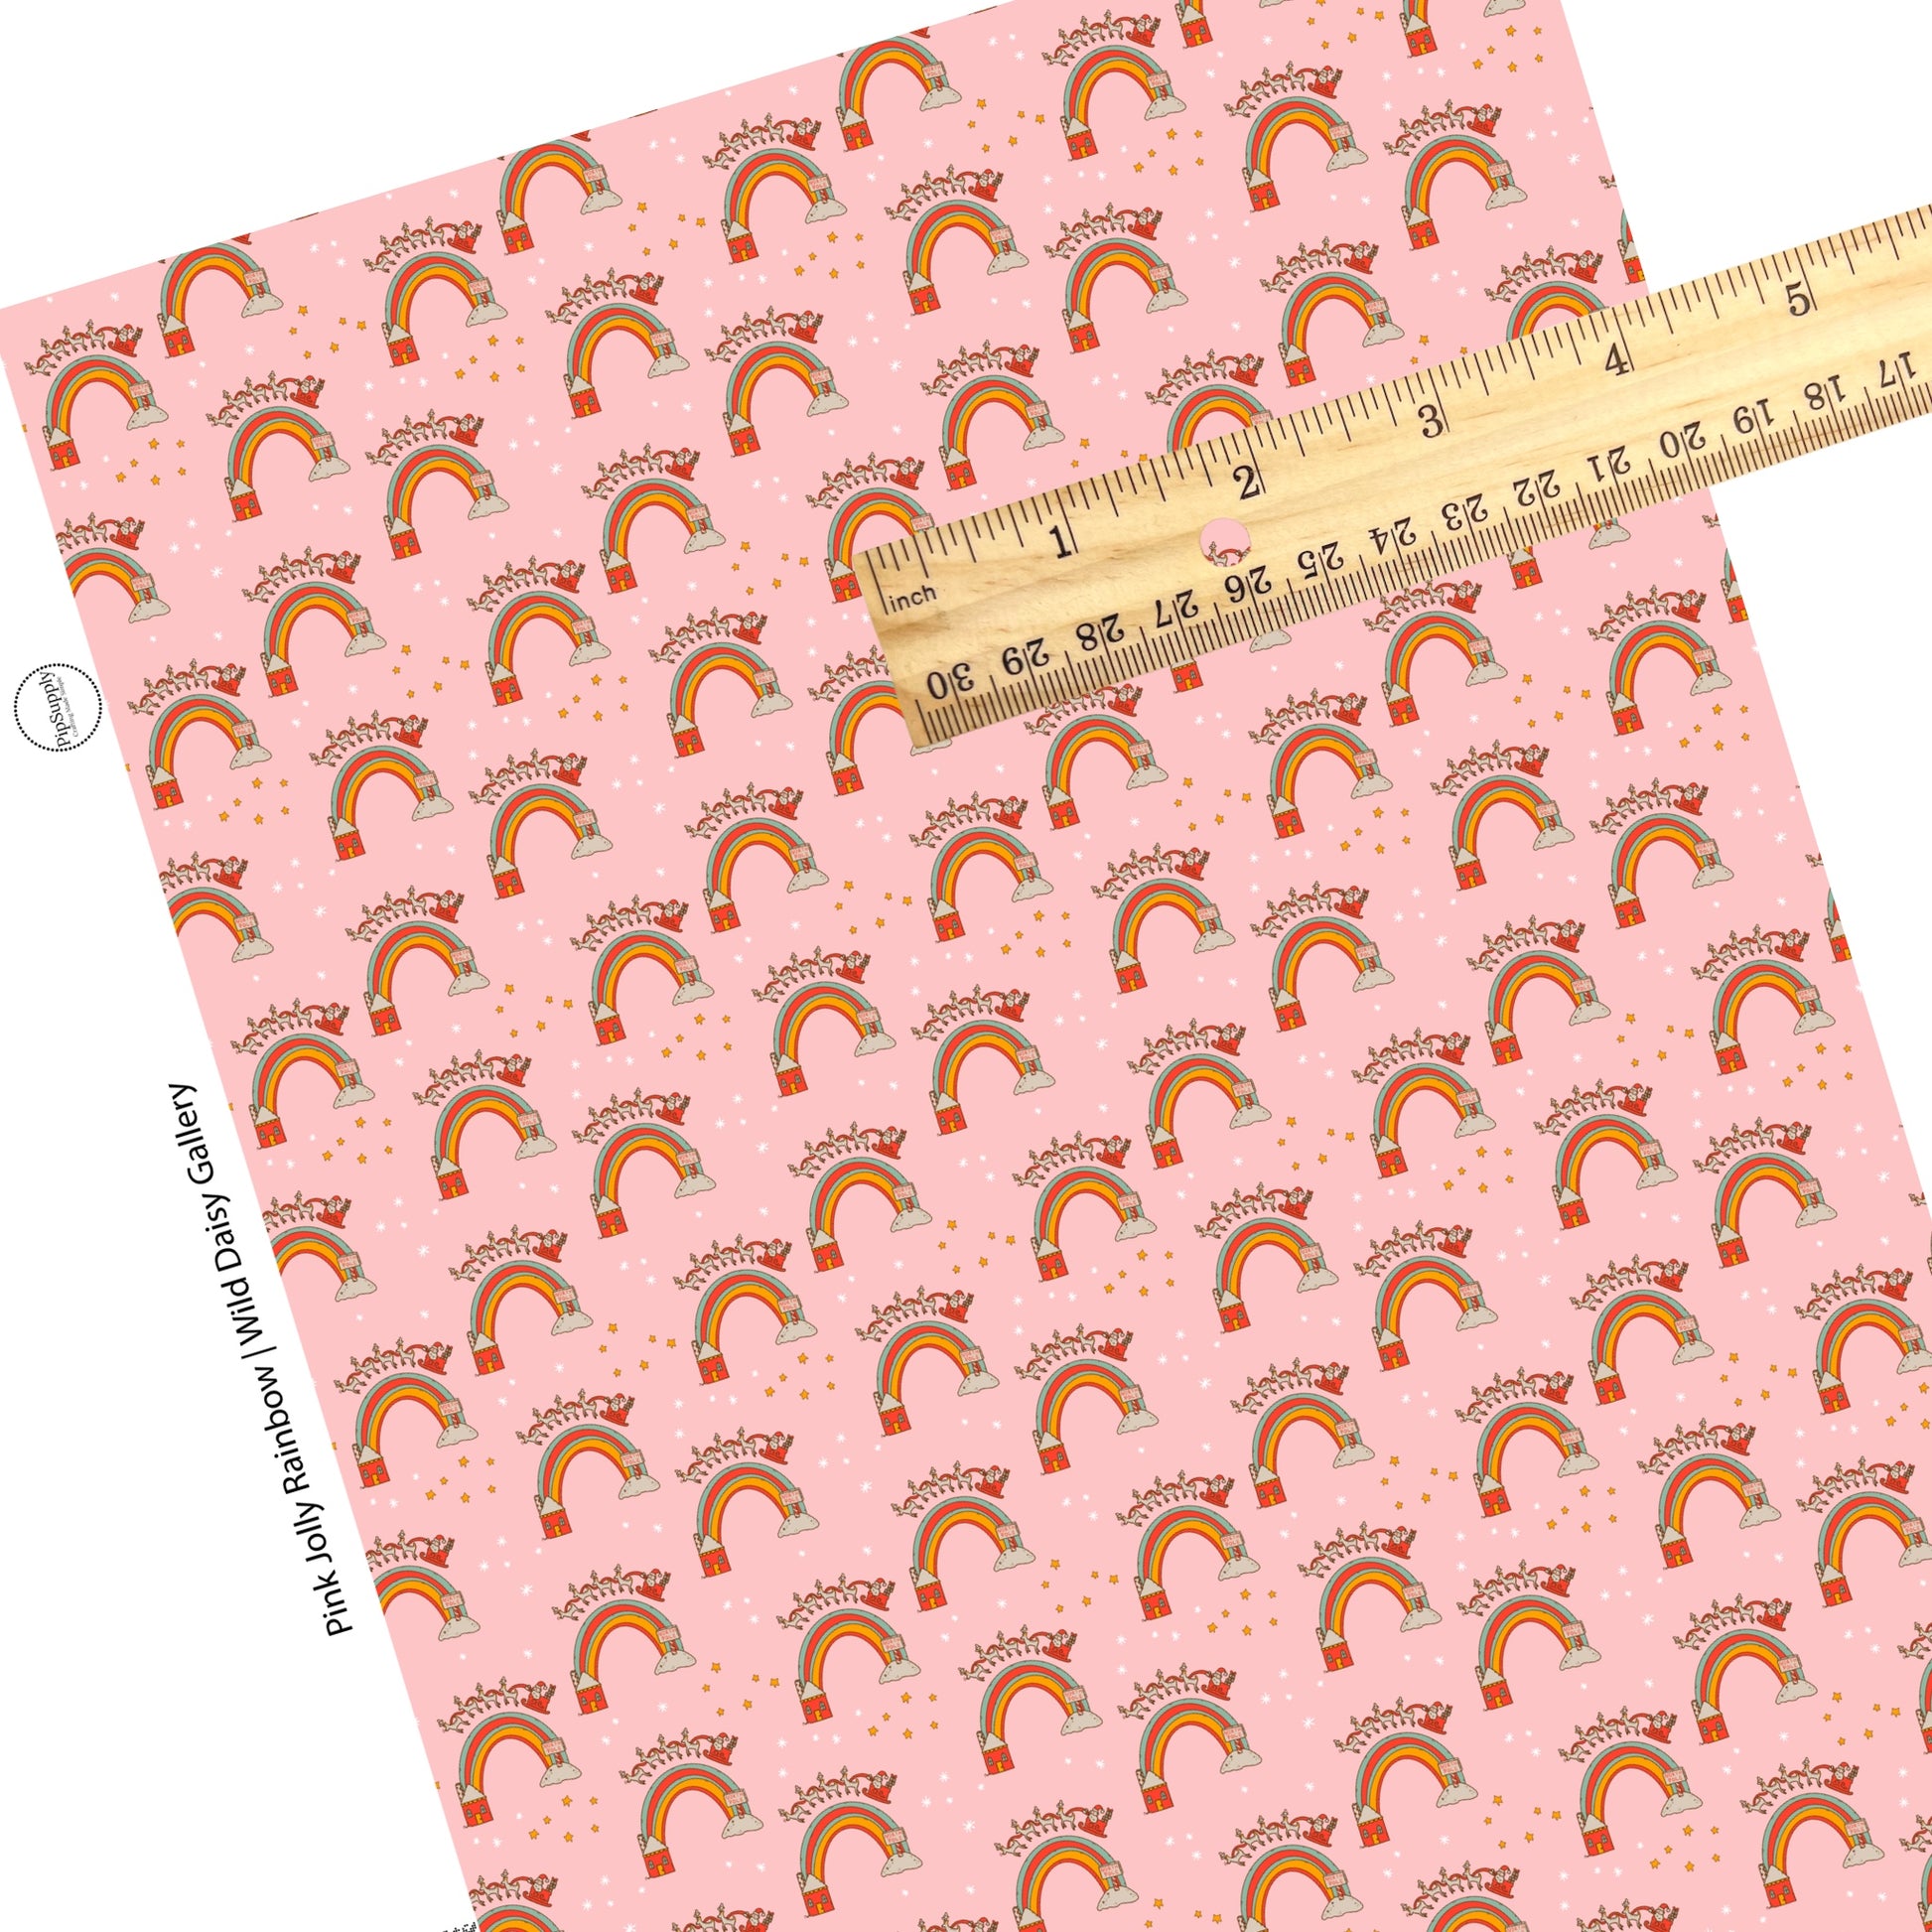 rainbows with santa and reindeer flying over them on pink faux leather sheet